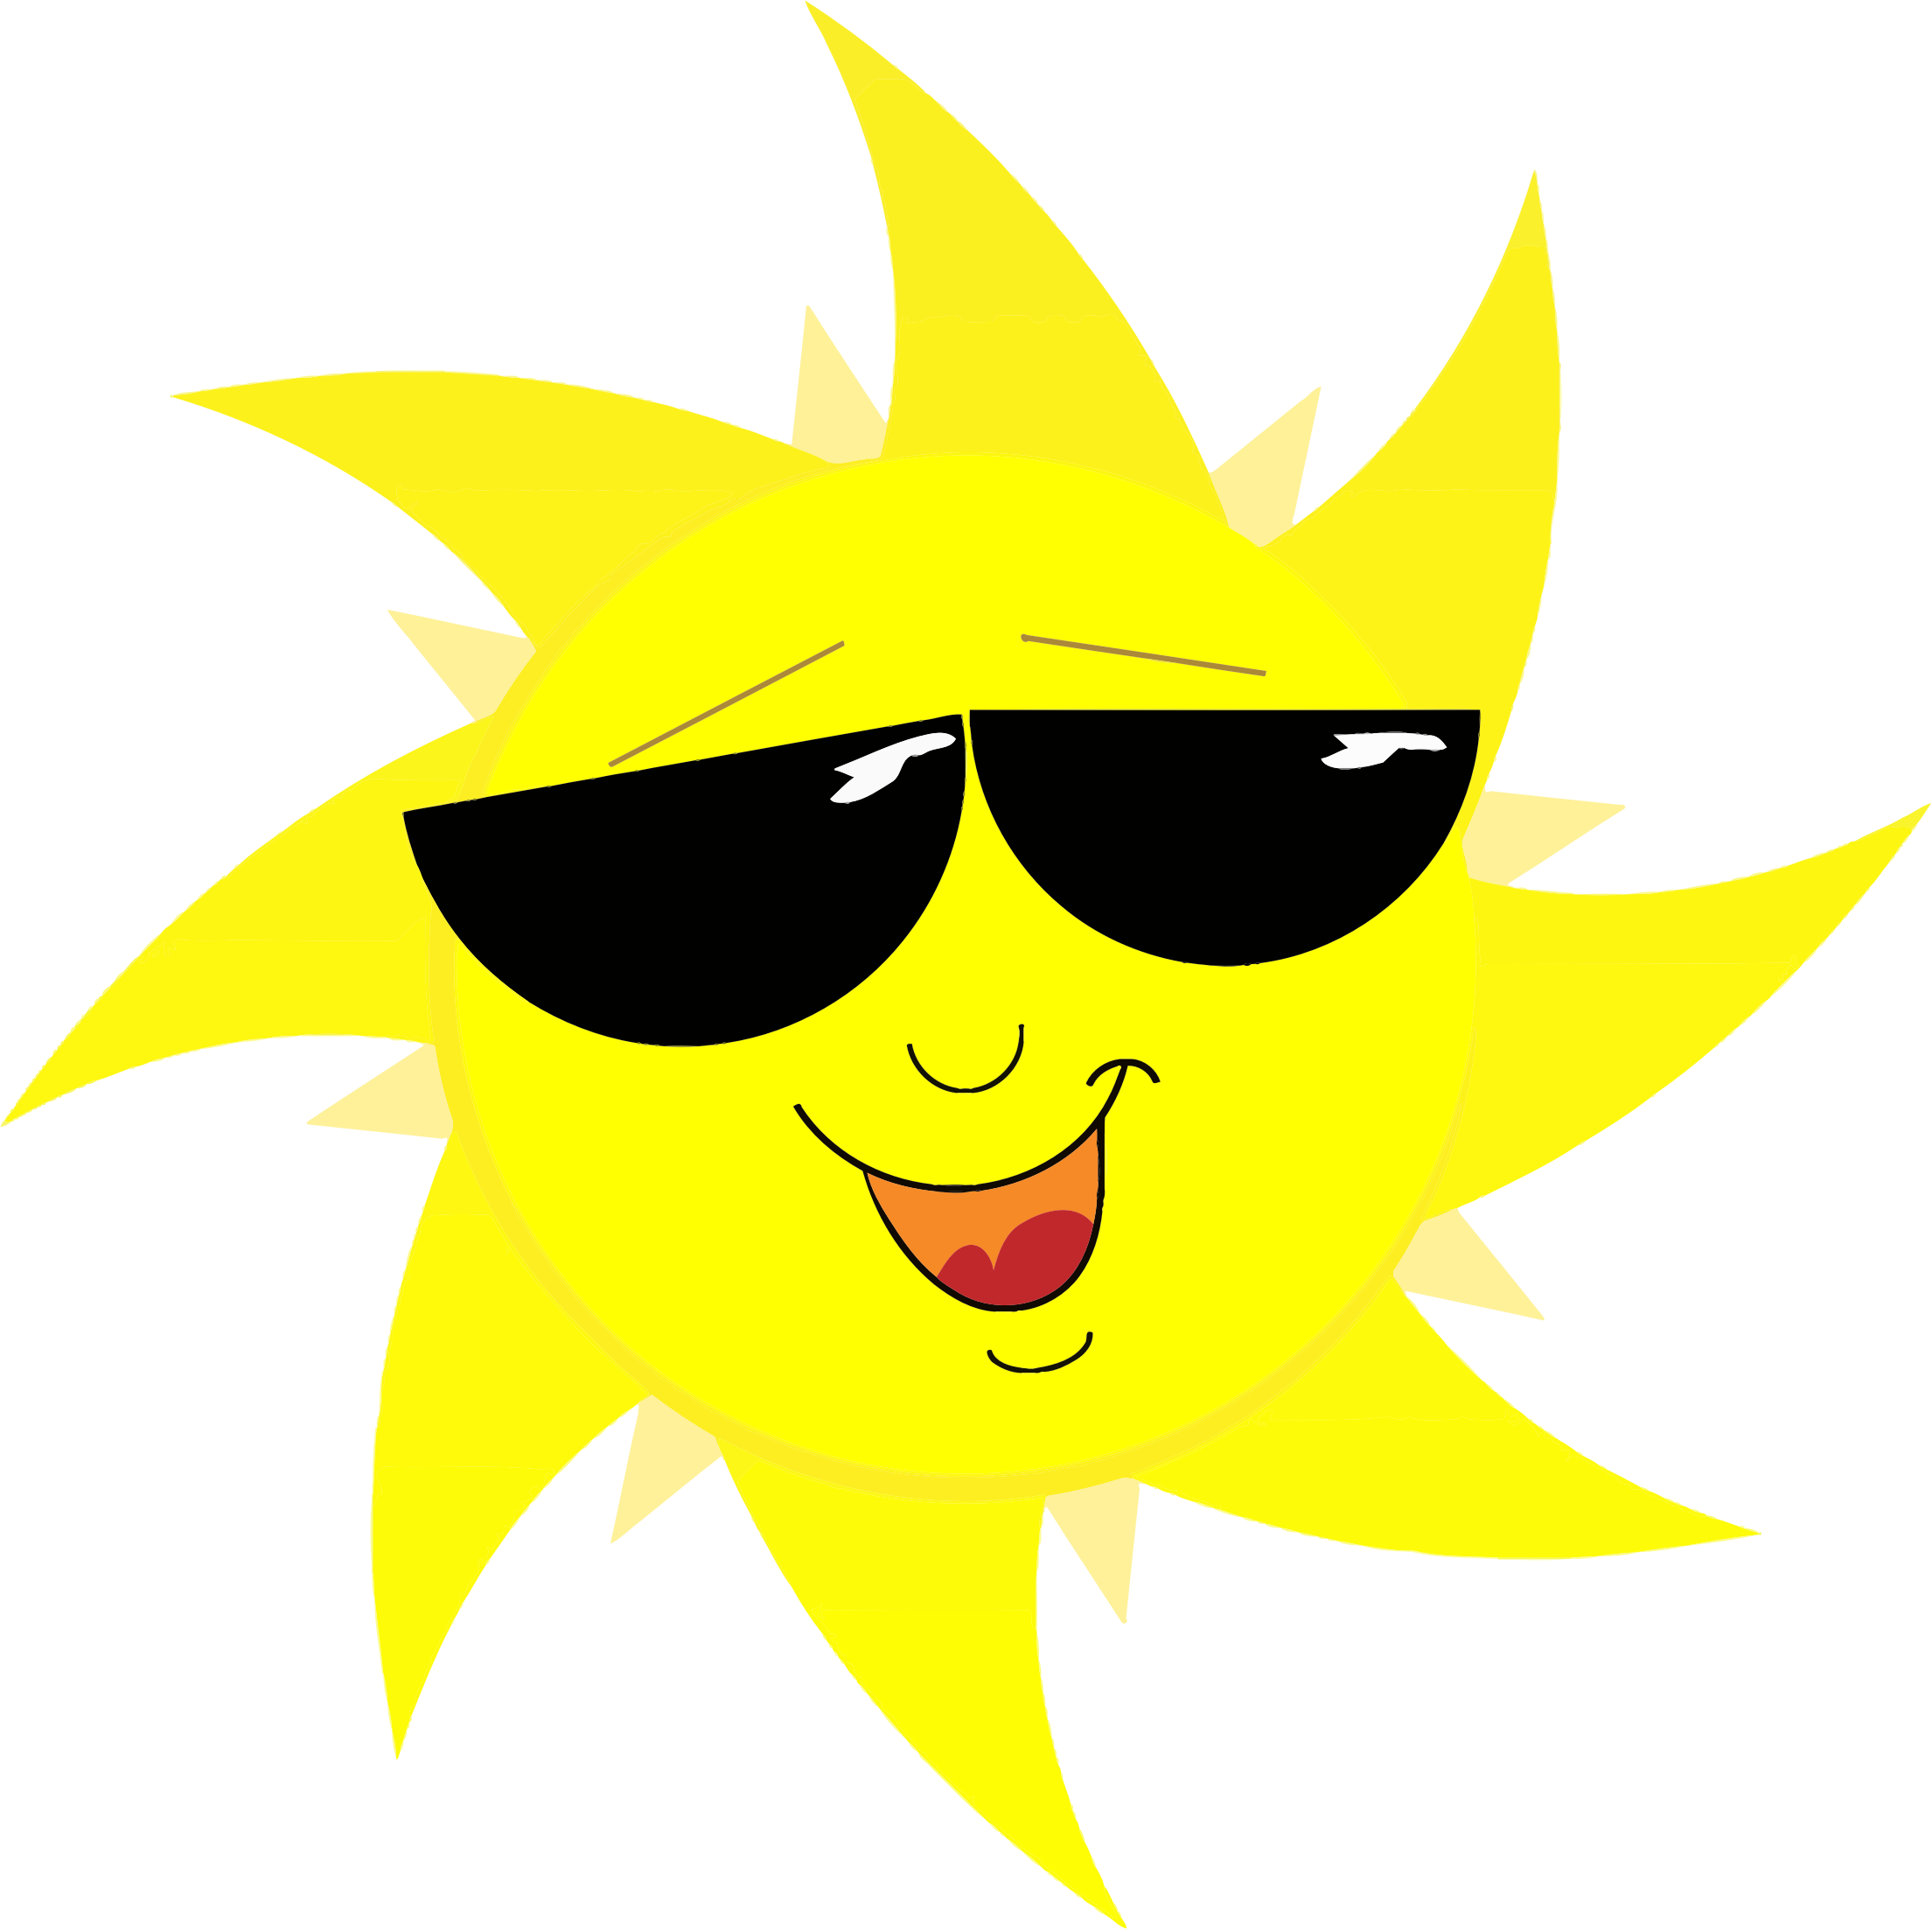 Peep chicken with sunglasses clipart 